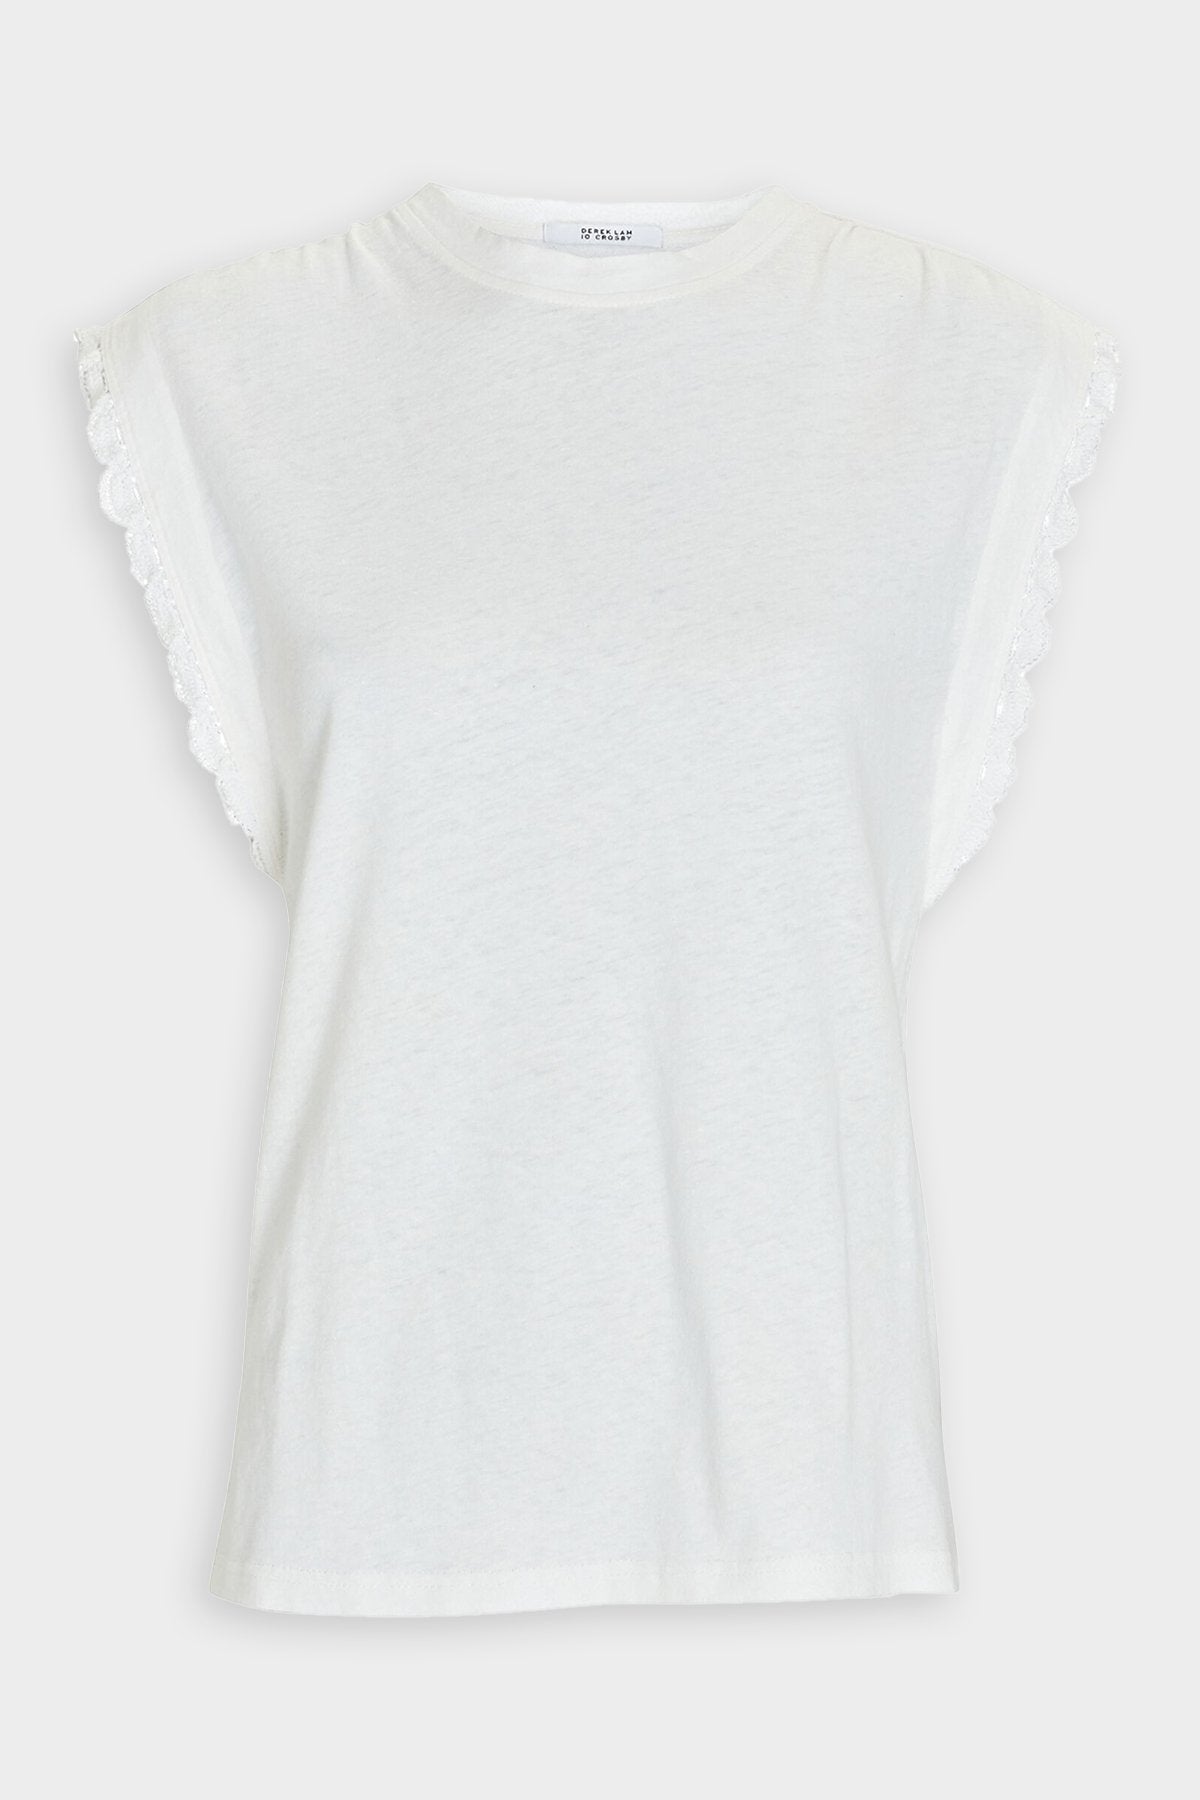 Sayles Muscle Tank in Soft White - shop-olivia.com